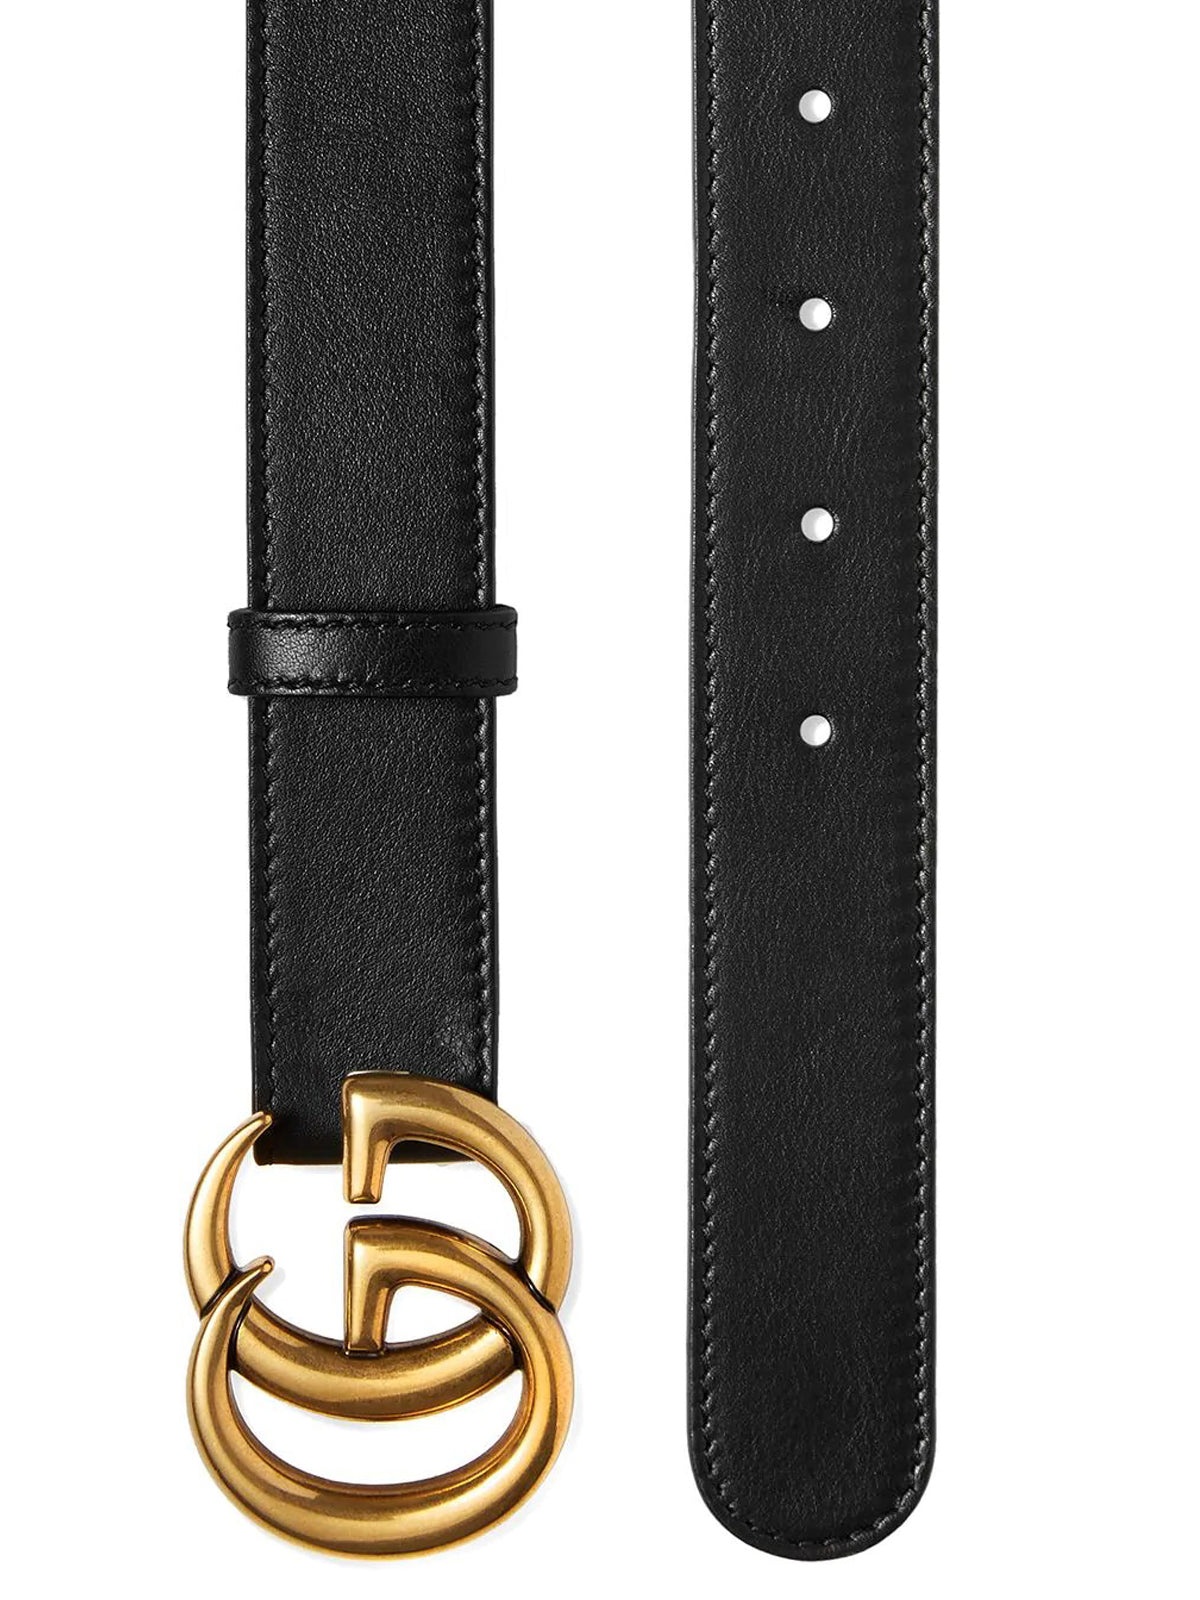 LEATHER BELT WITH DOUBLE G BUCKLE - 2